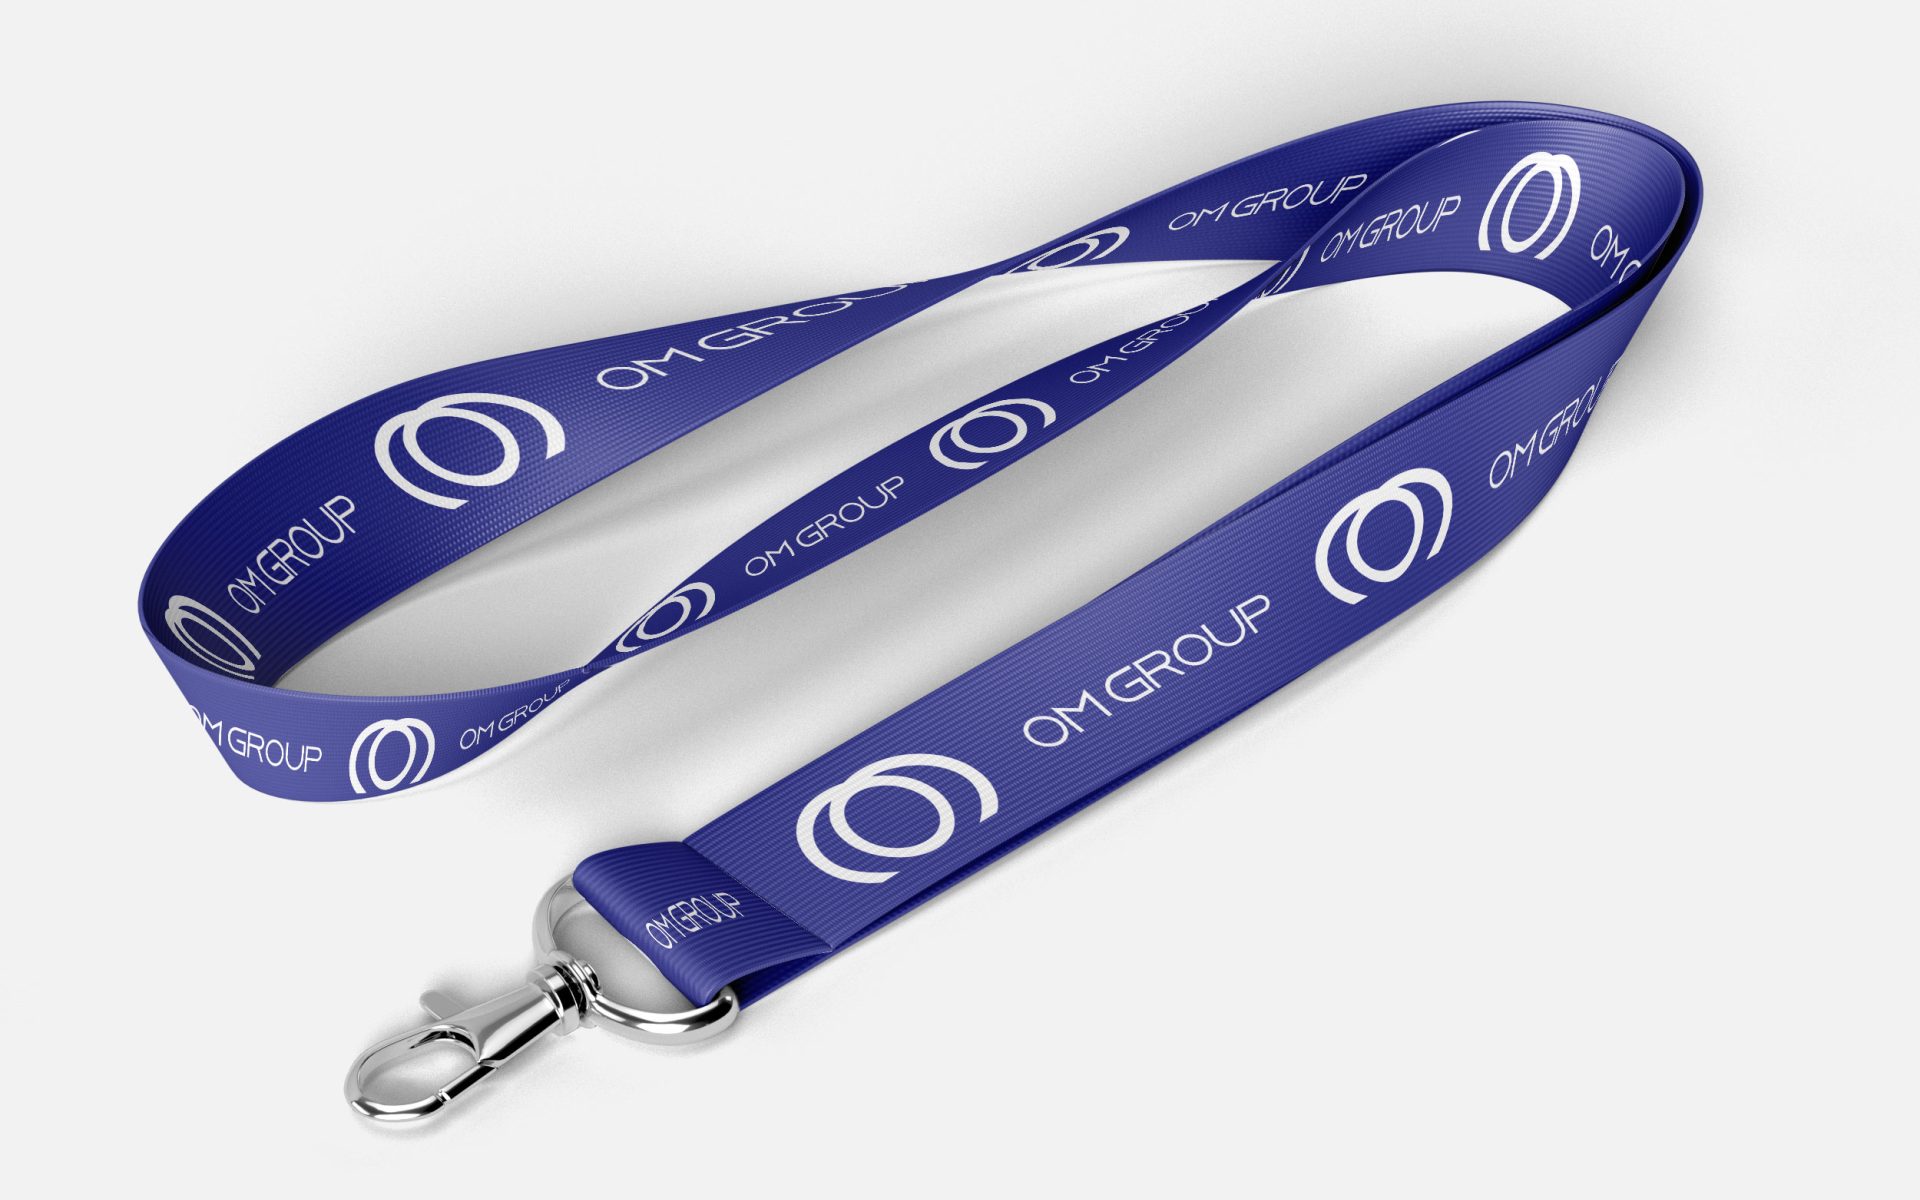 Om group identity card lanyard design with new logo by HDegree